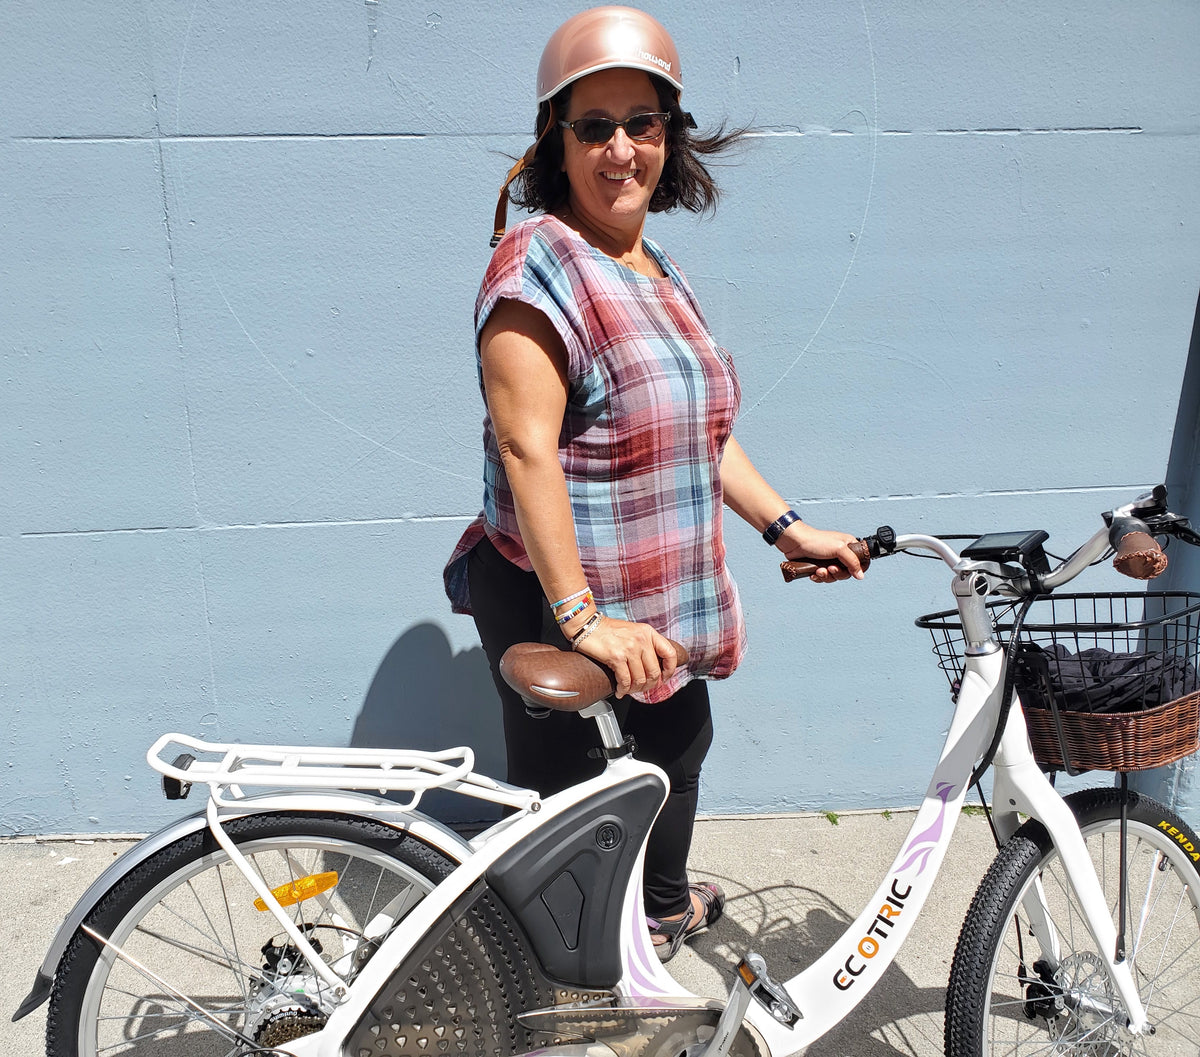 The life changing benefits of e-bike ownership